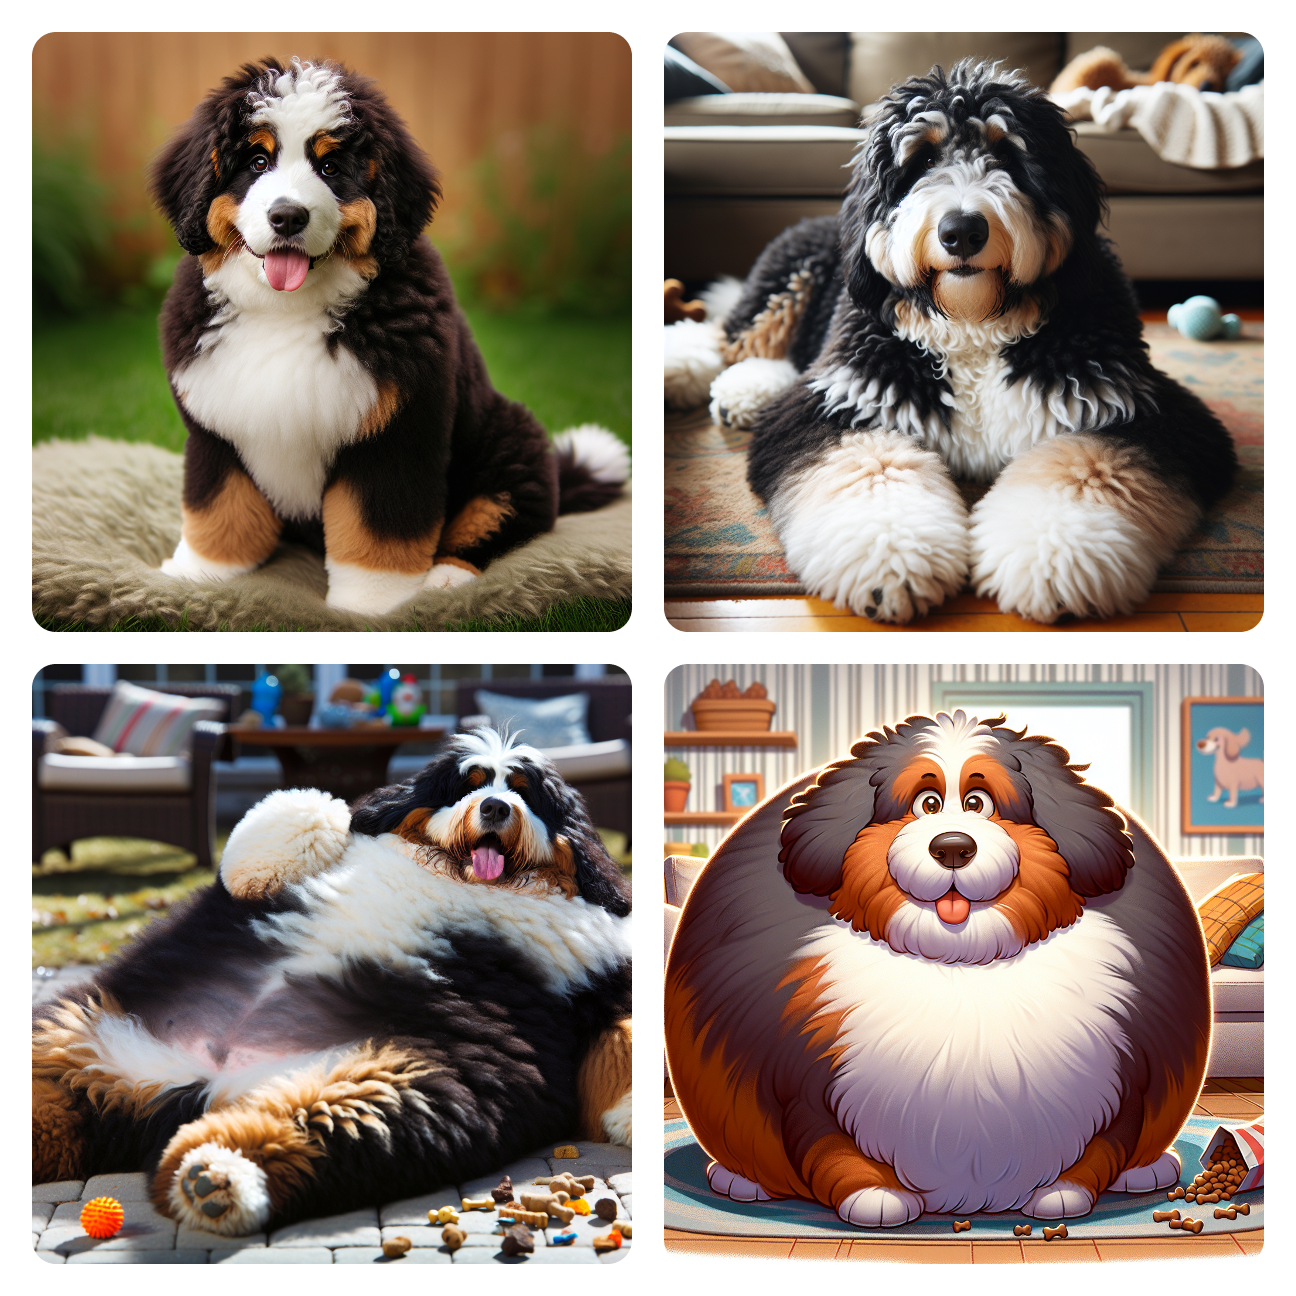 Image: From Chub to Flub: A Bernedoodle's Journey